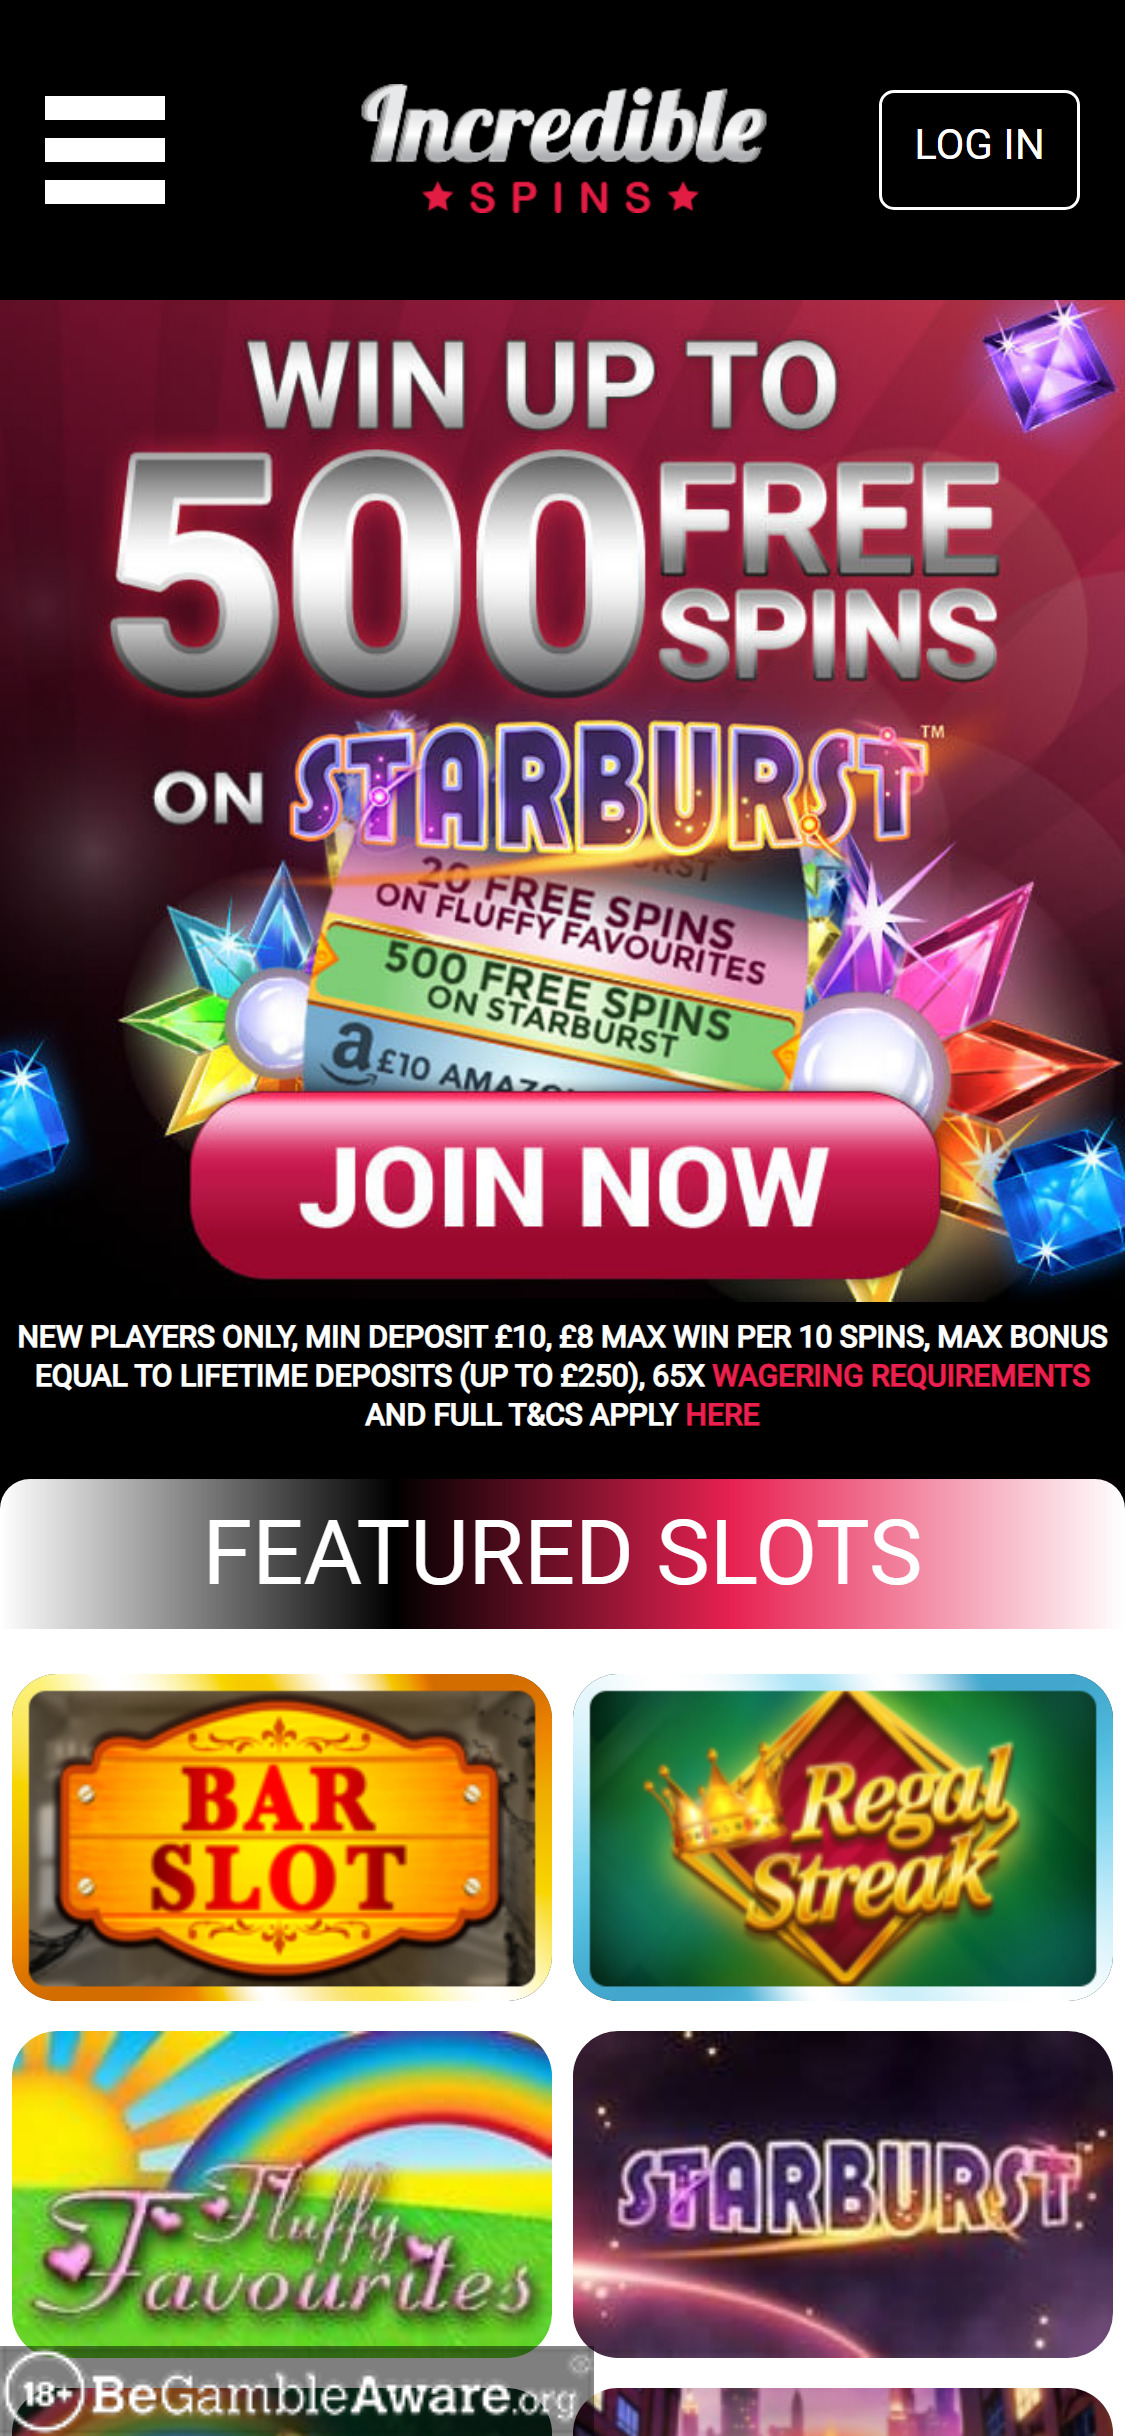 Incredible Spins Casino Mobile Review